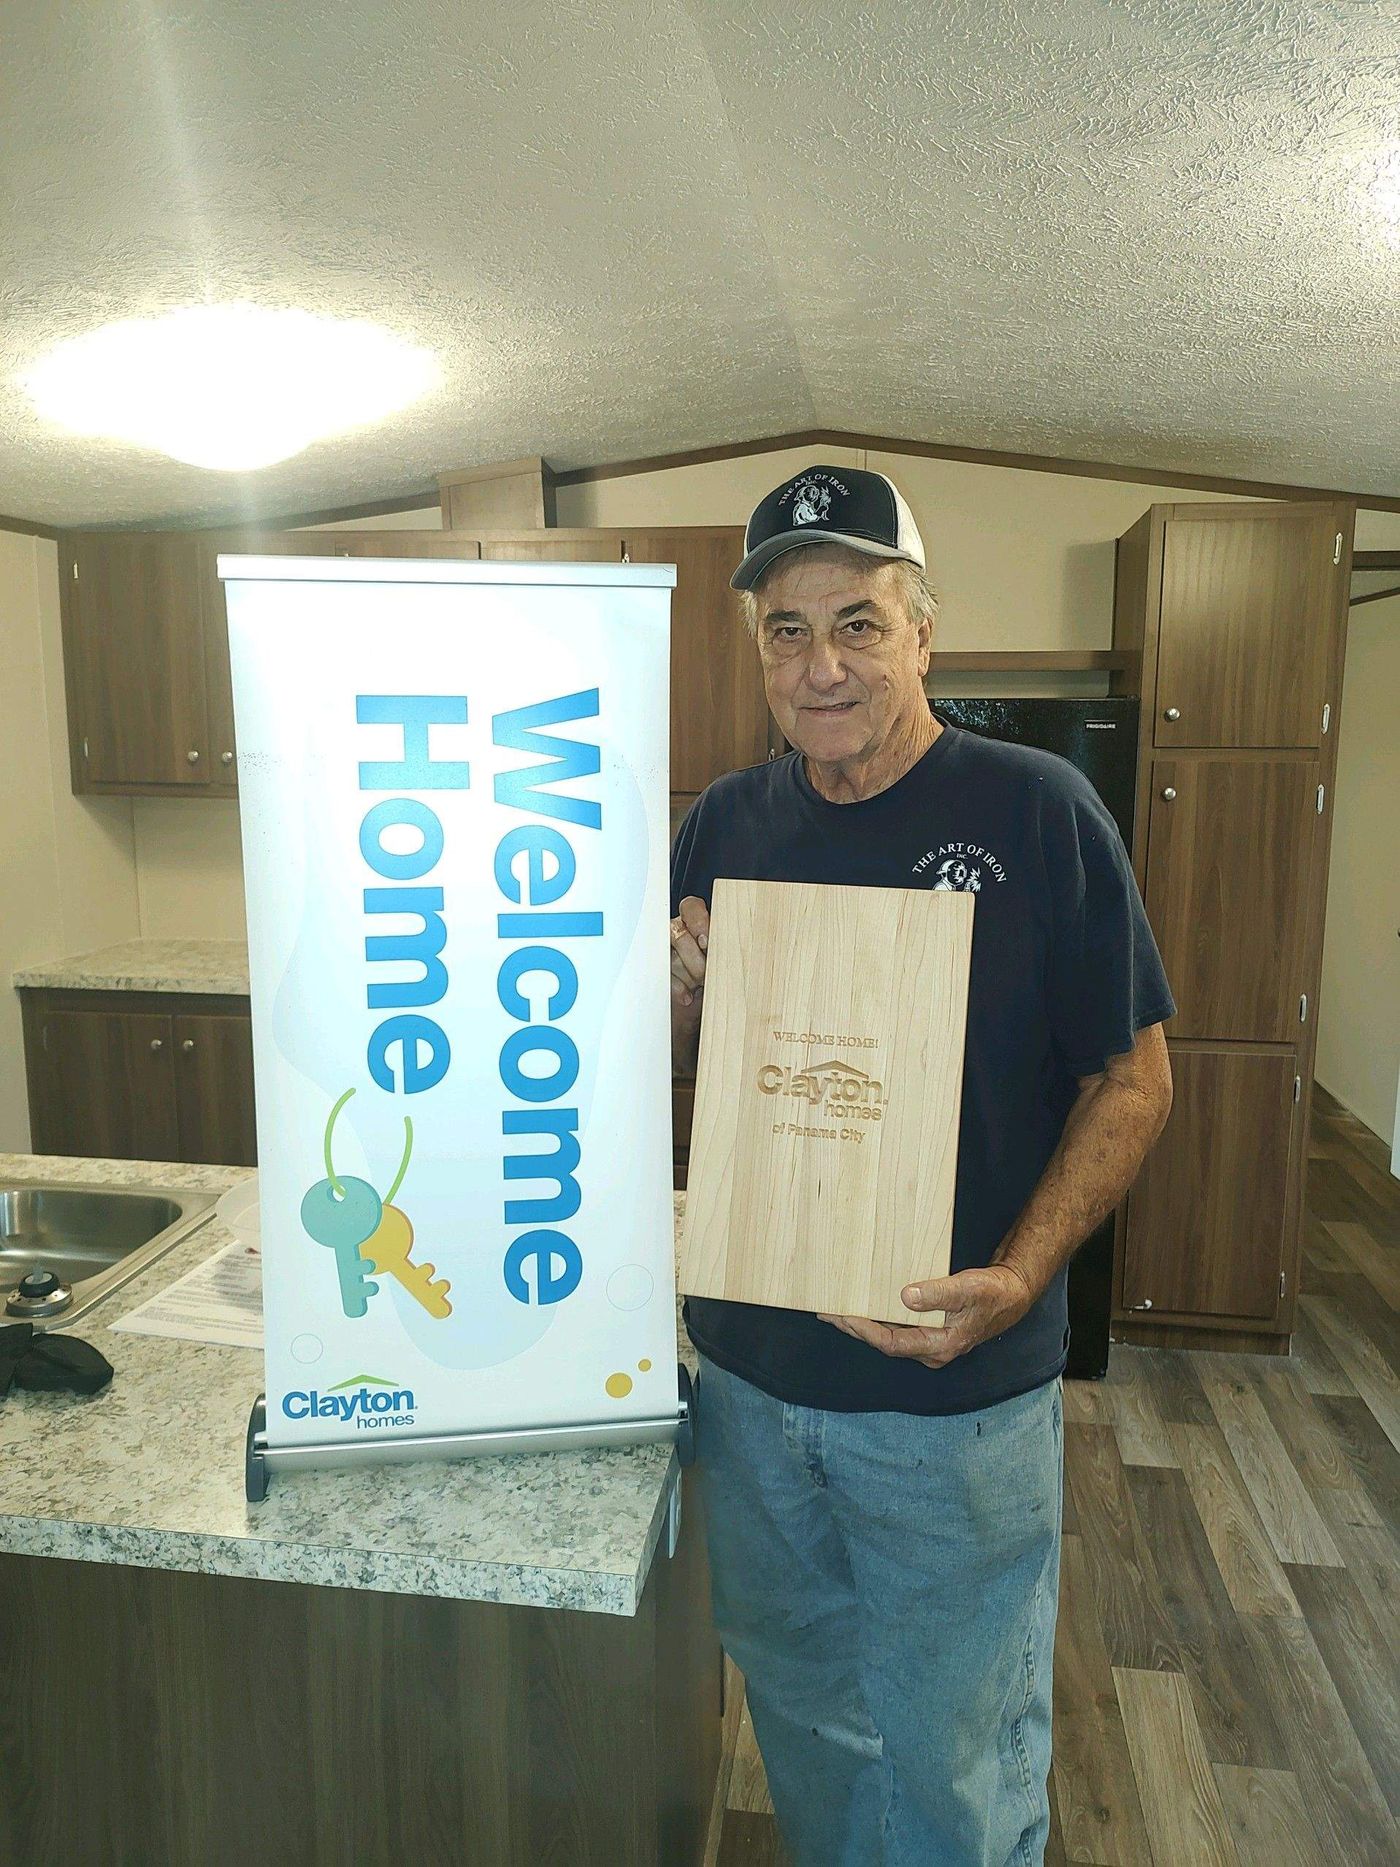 HAROLD S. welcome home image